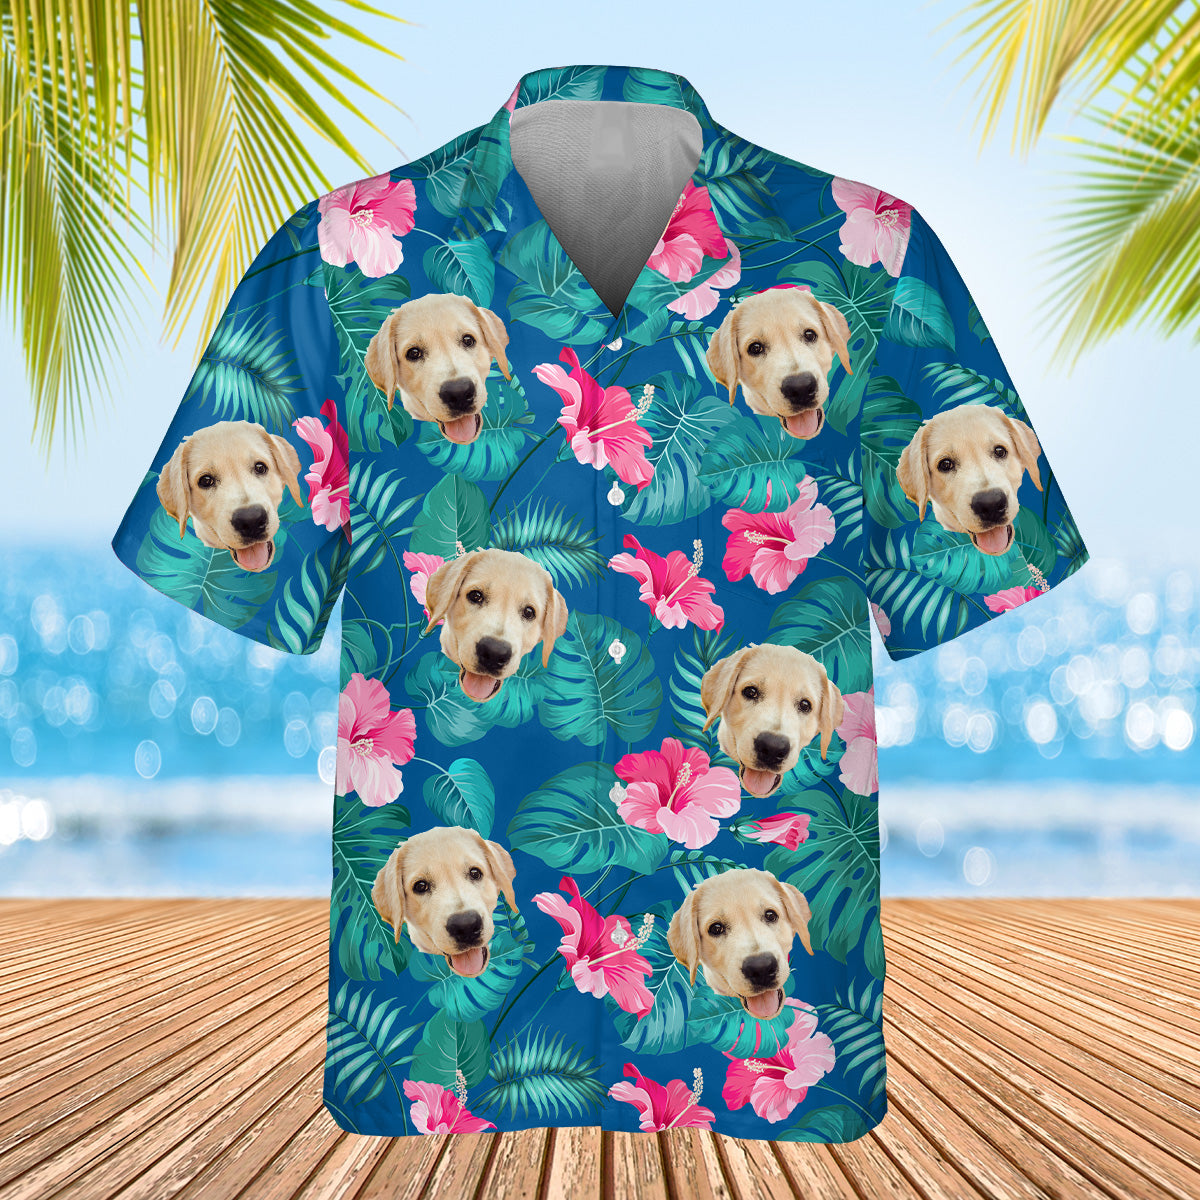 dark blue palm leaf themed shirt with dogs